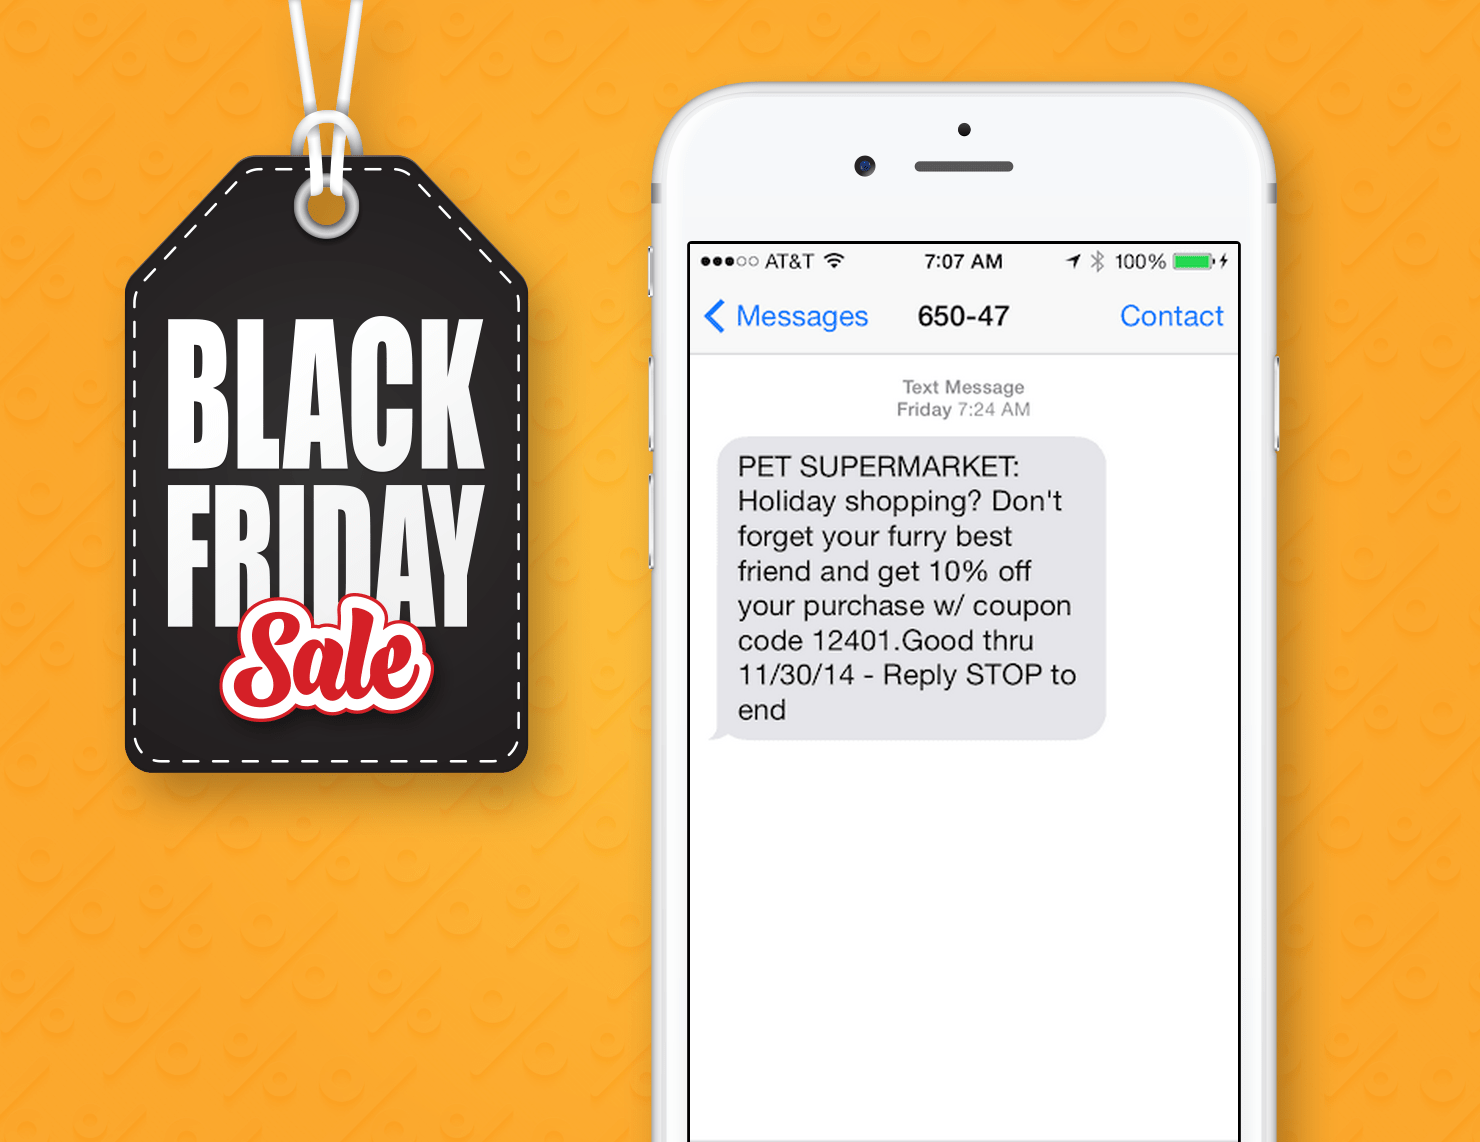 Black Friday SMS Marketing Example From Pet Supermarket